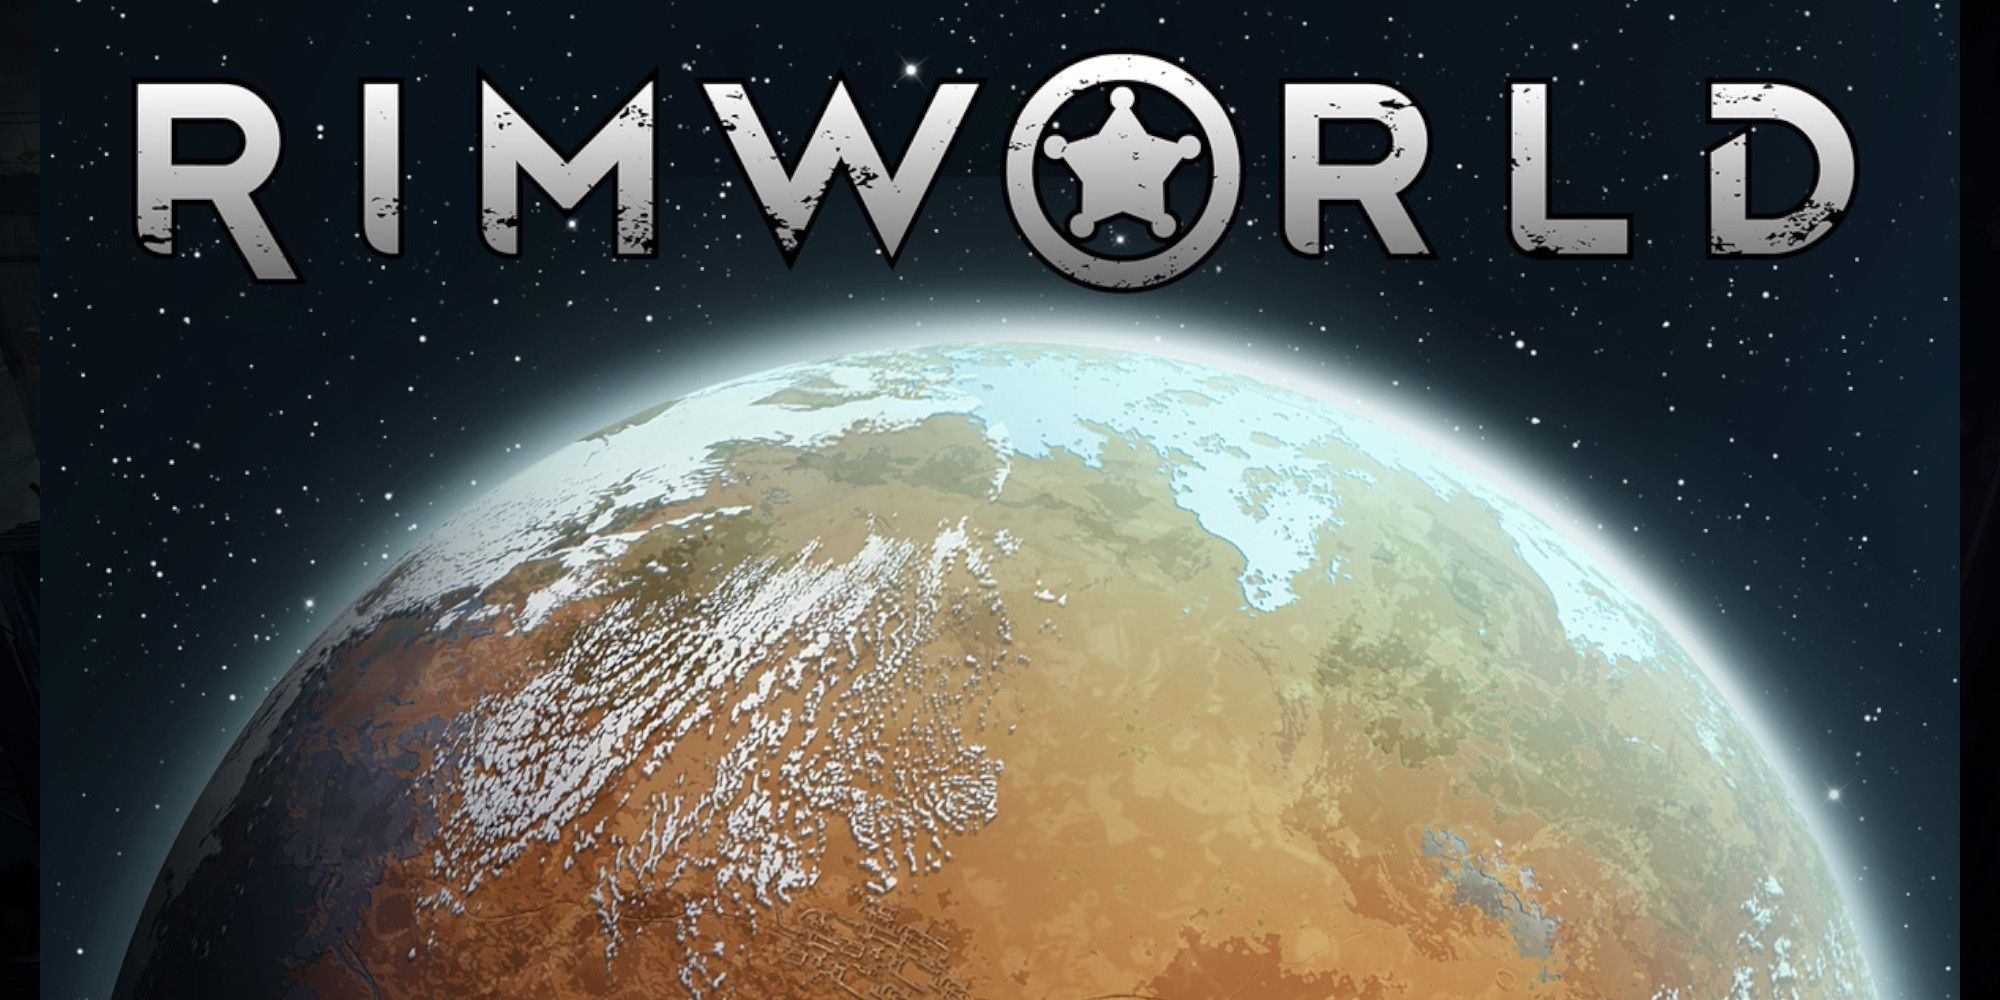 the rimworld logo, a desert planet with the rimworld name above it